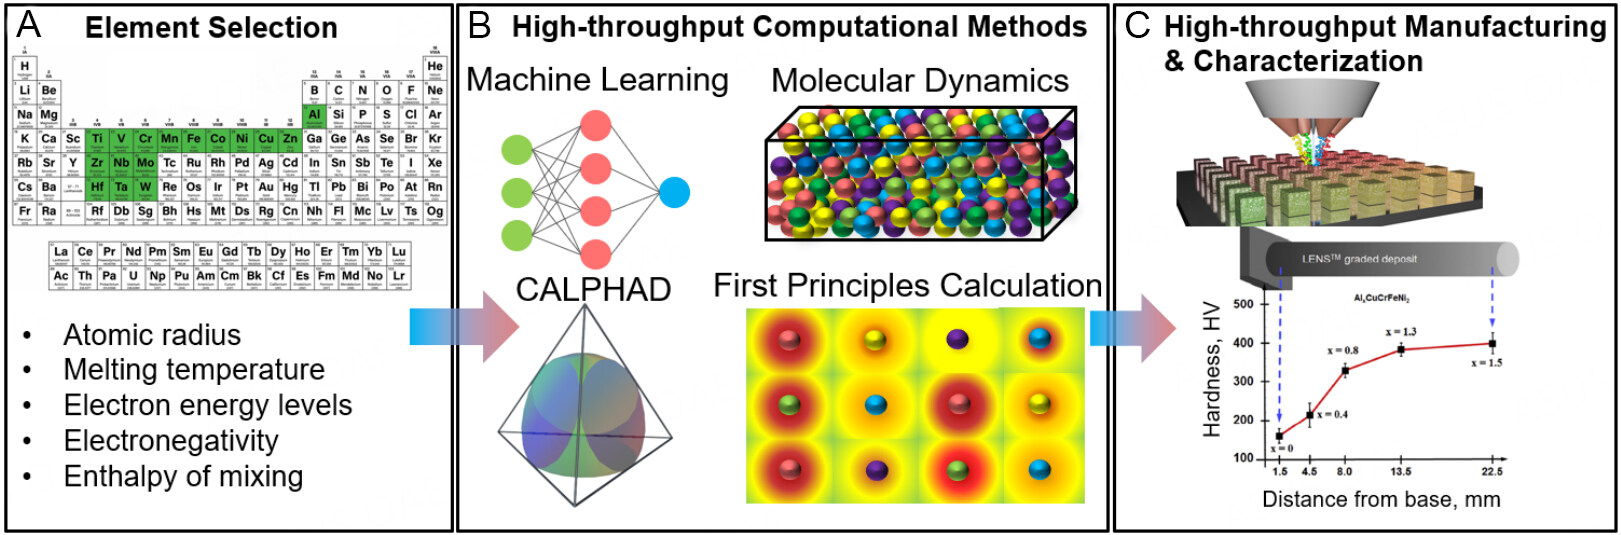 A review on high-throughput development of high-entropy alloys by combinatorial methods